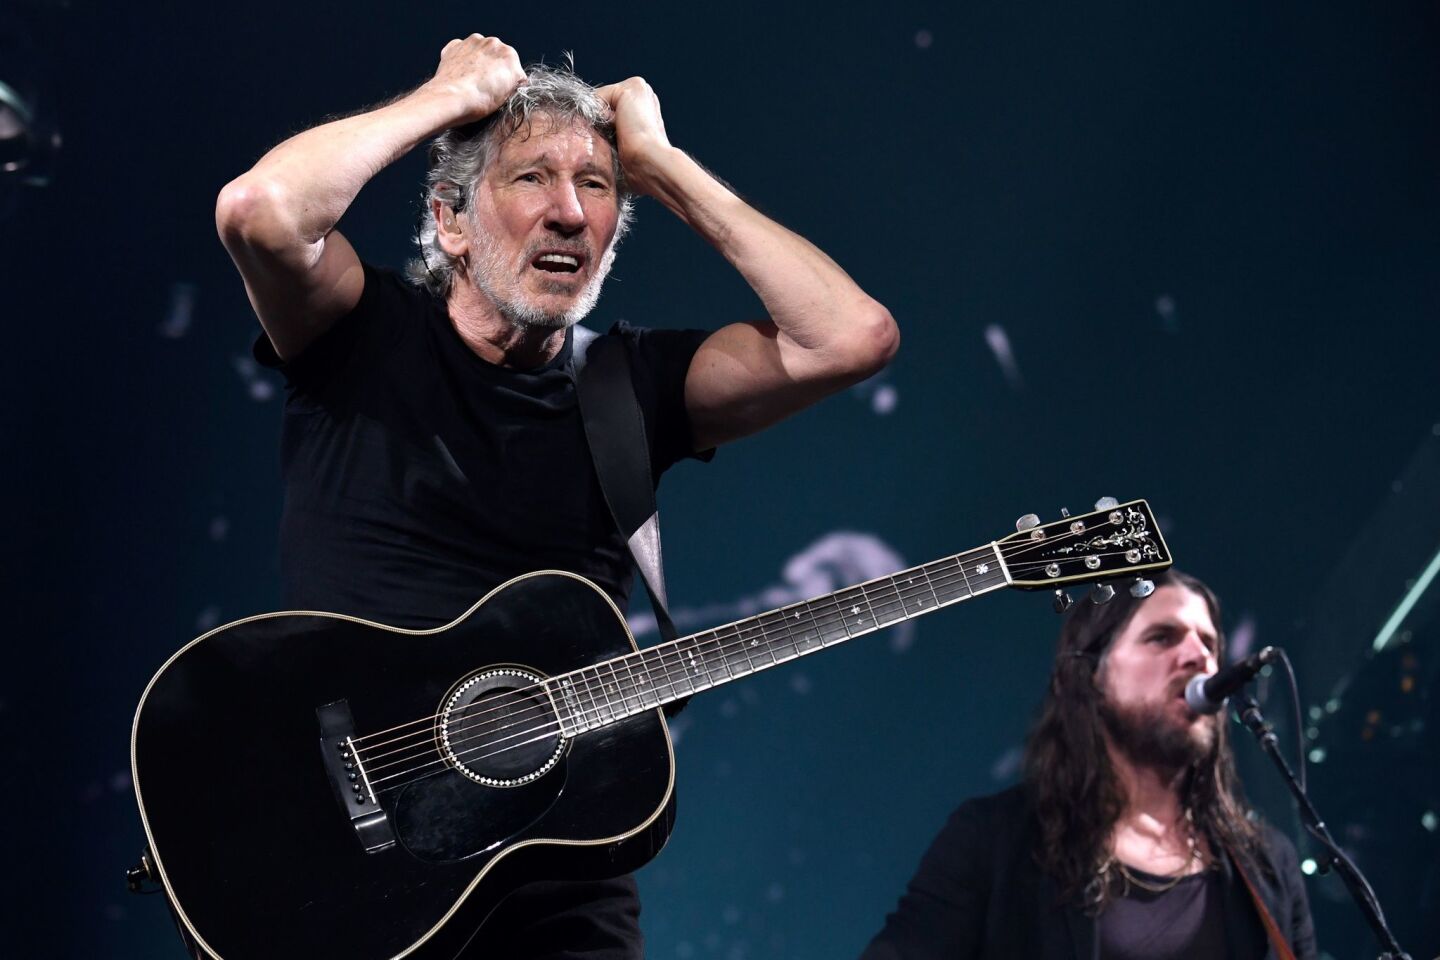 7. Roger Waters